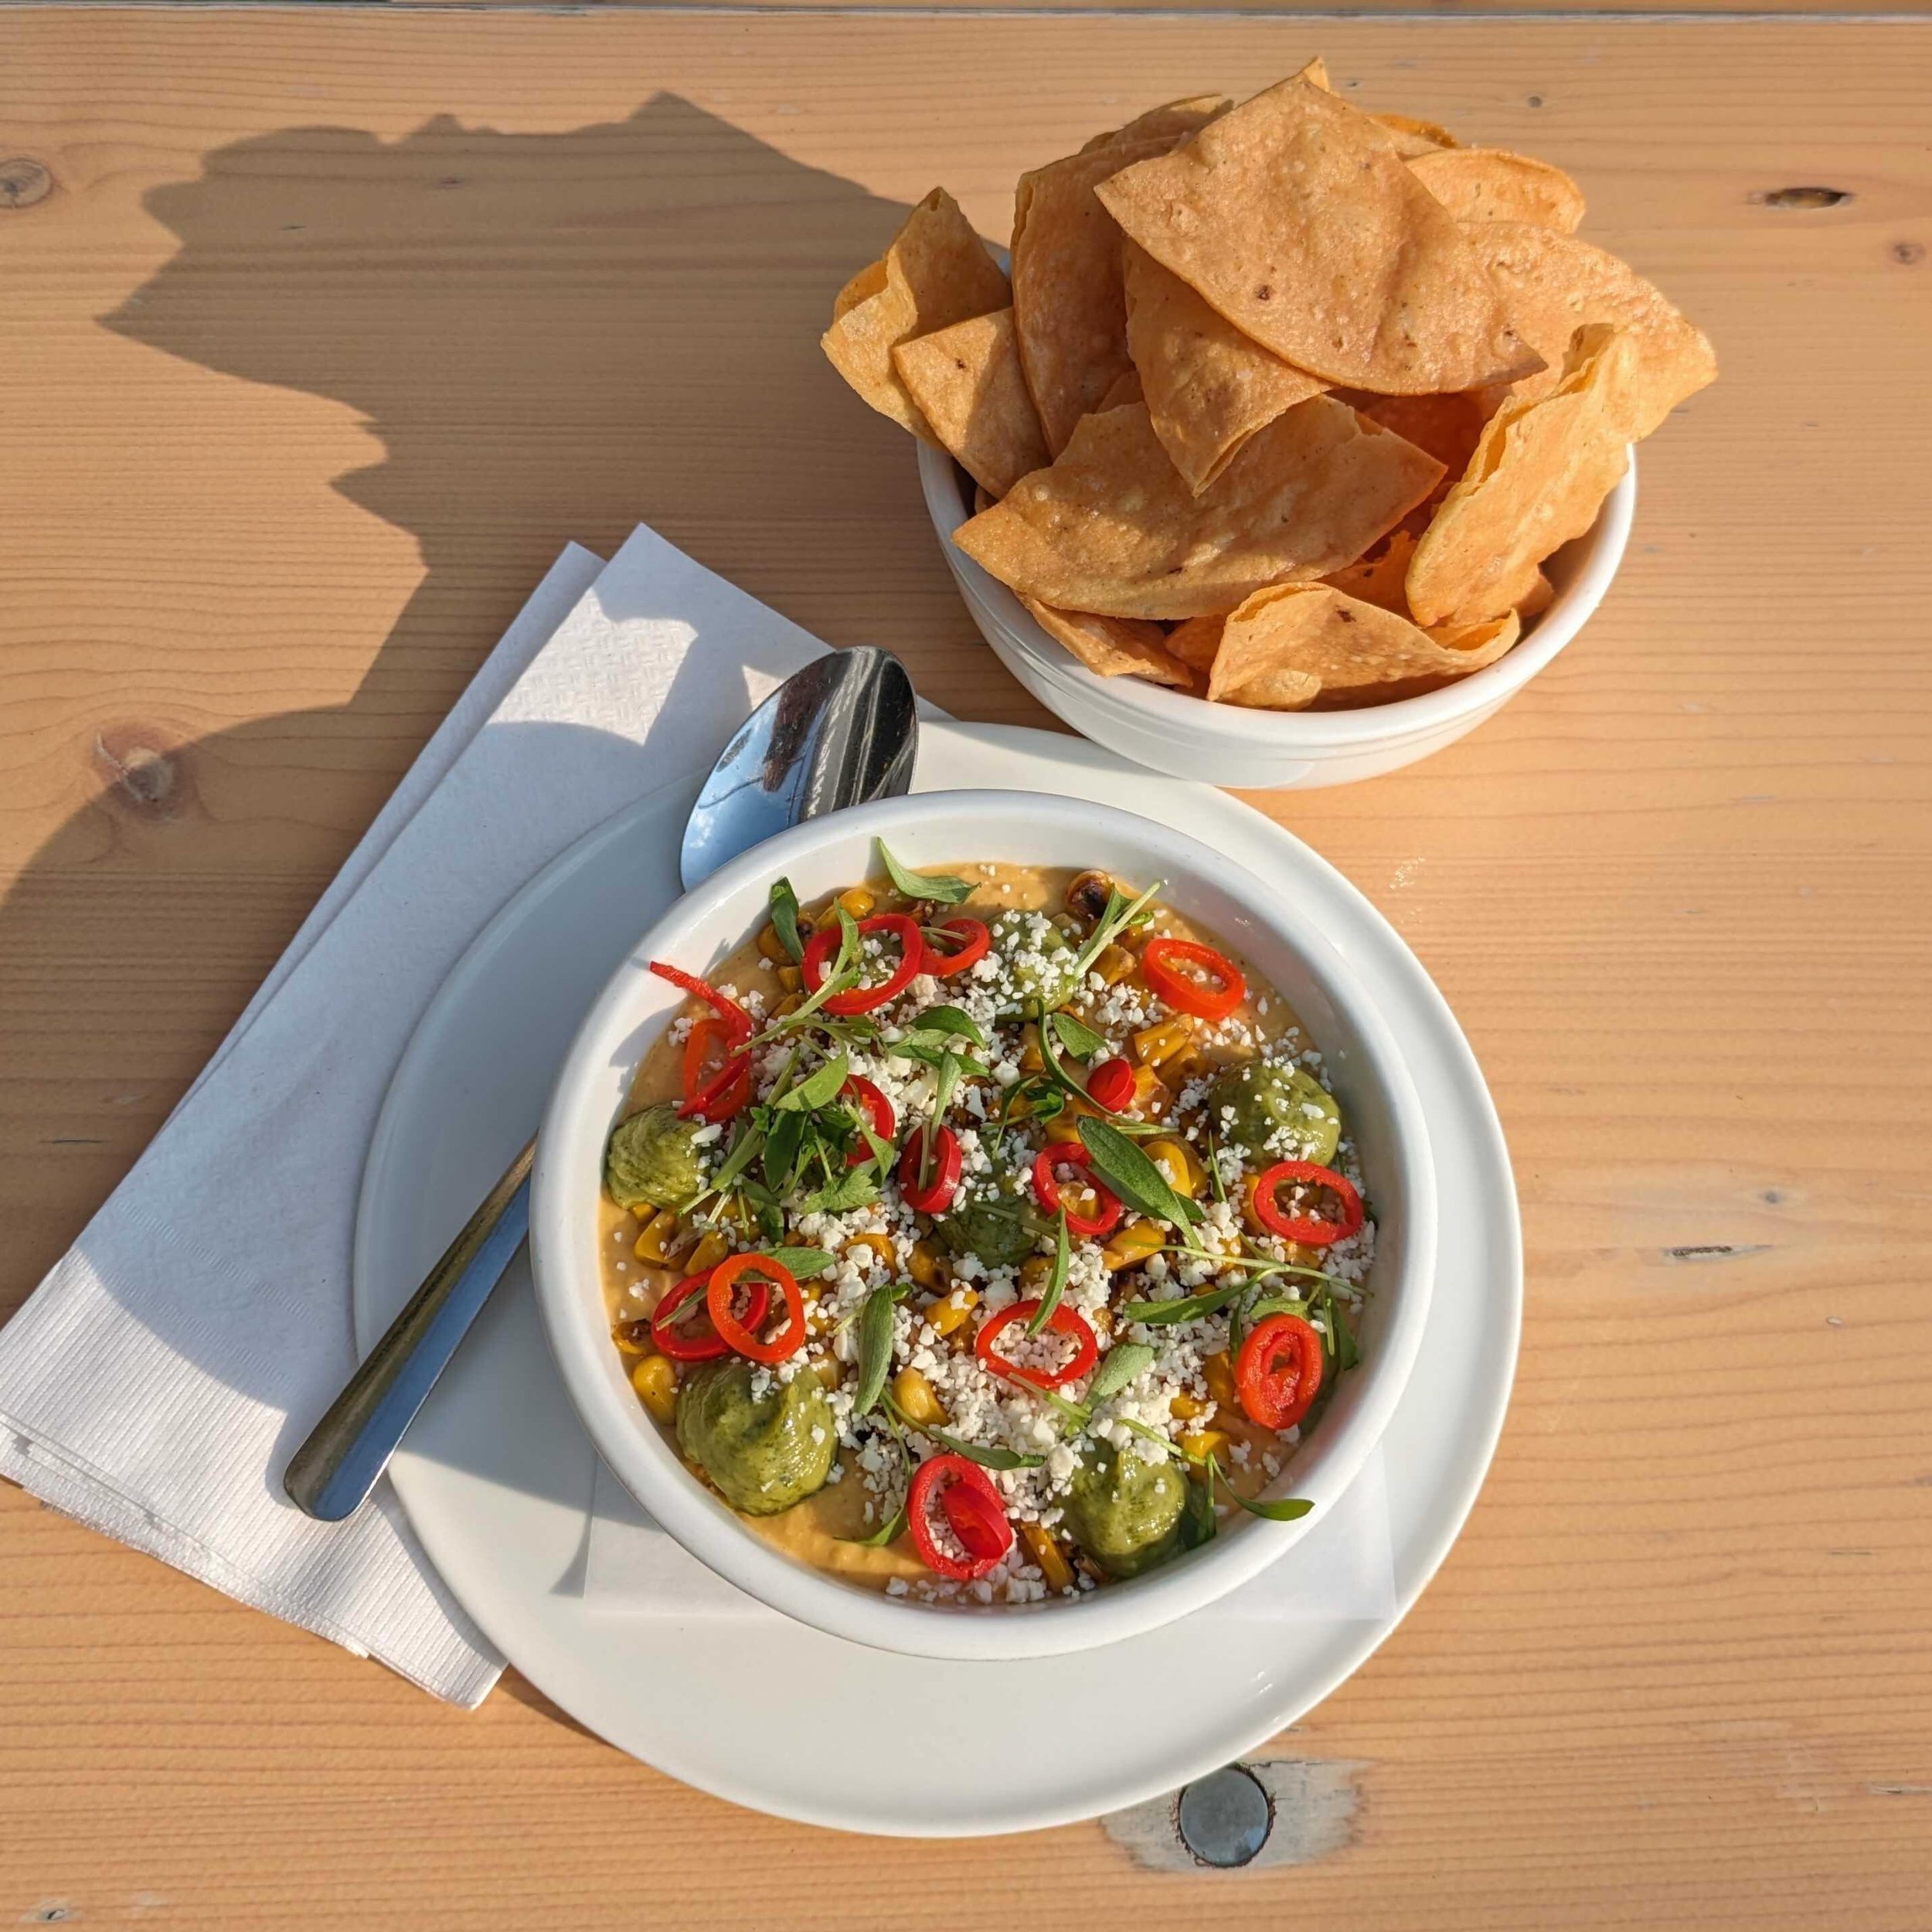 A warm weather fav is back on the menu 💥

E L O T E  H U M M U S 

chickpea &amp; corn hummus, cotija cheese, avocado, pickled chili, cilantro, charred corn, chili lime oil
served with tortilla chips 

The perfect patio snack! Very shareable, althou